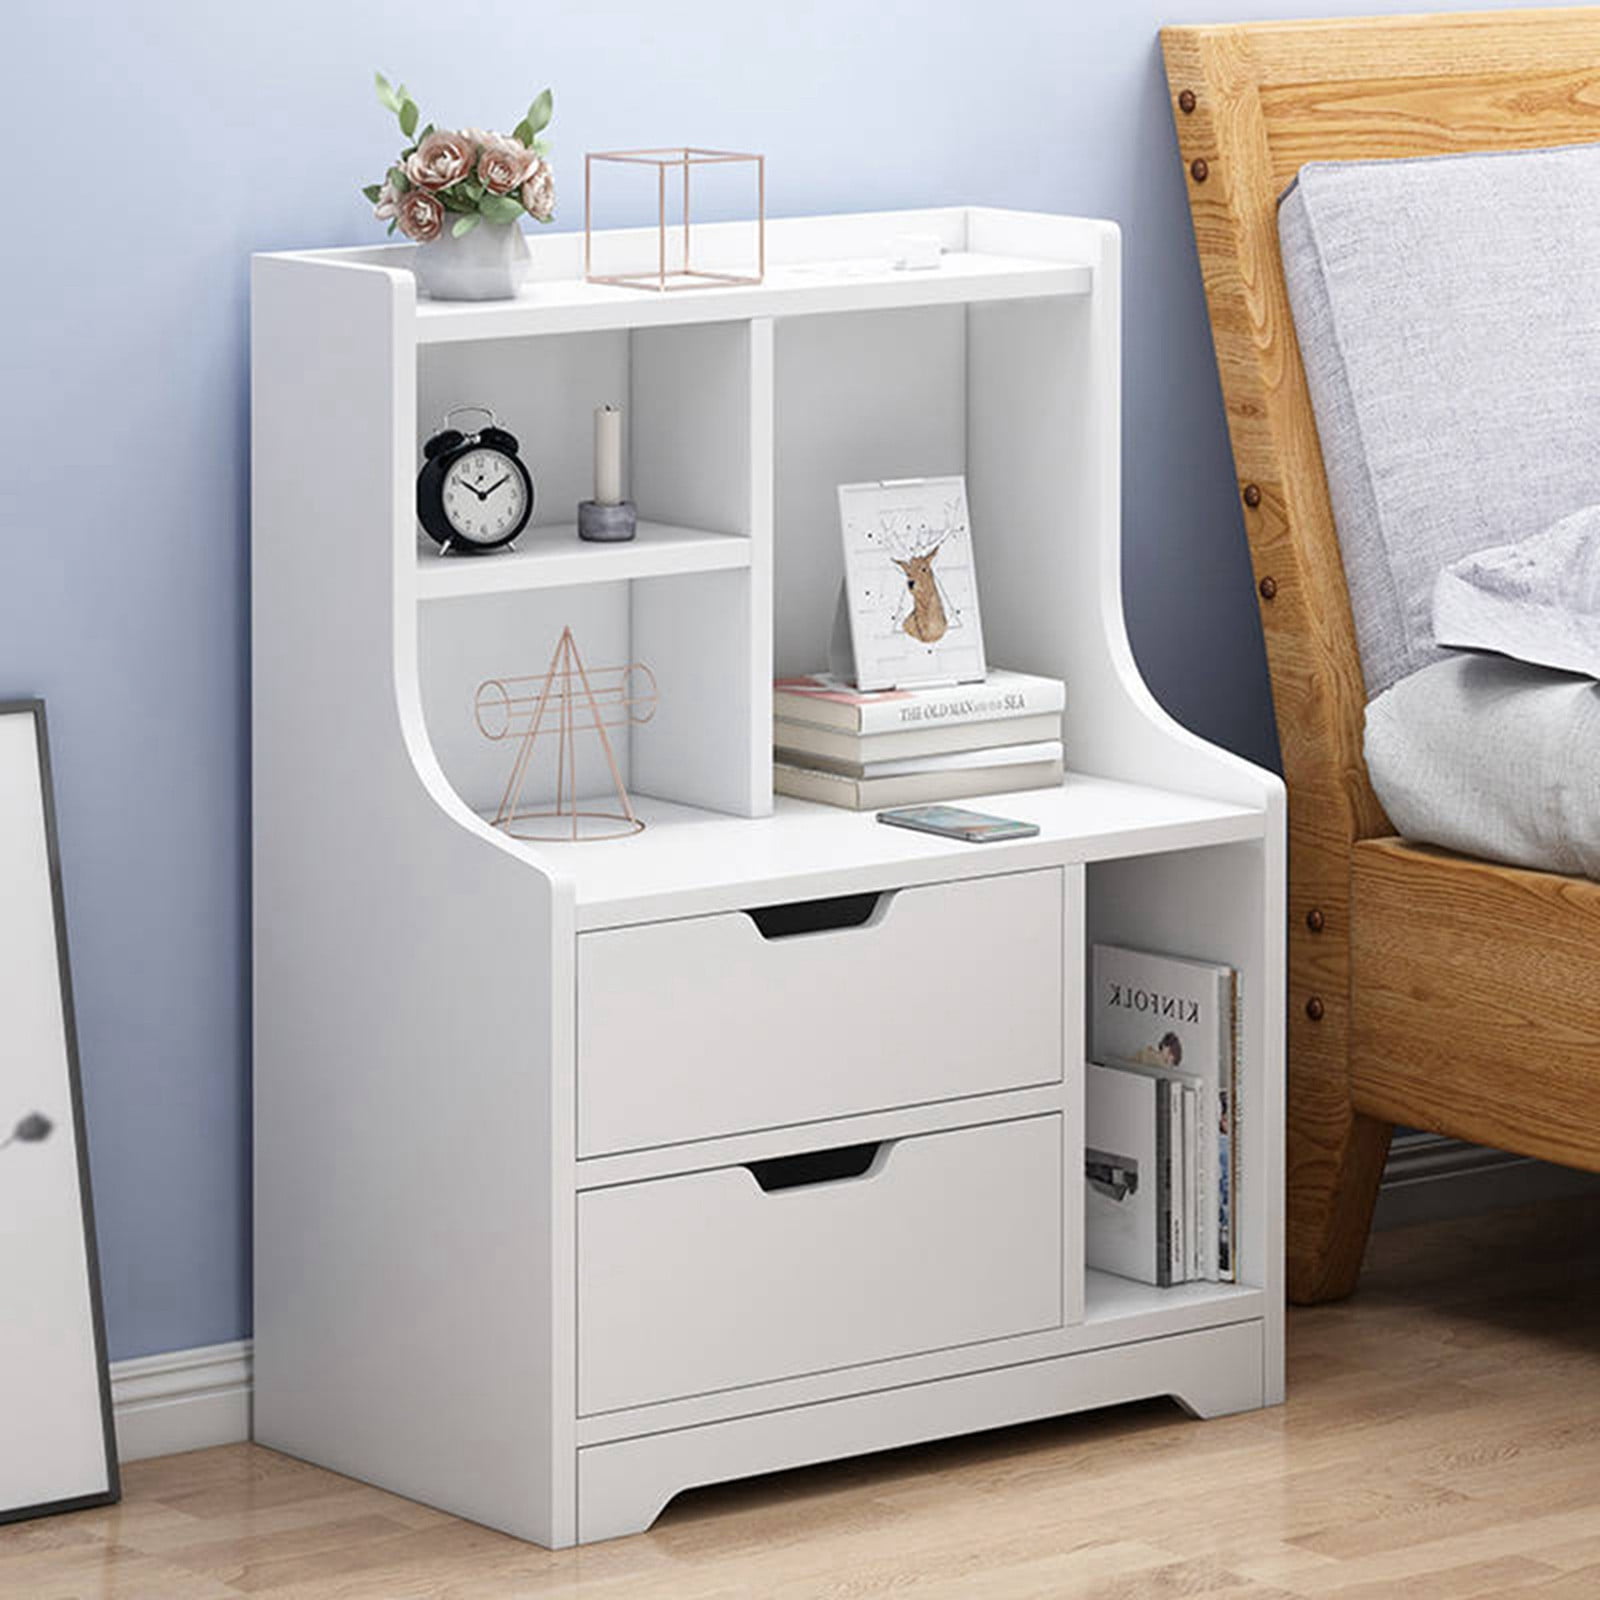 Bedside Table Bedroom Simple Storage Bedside Table Easy Assembly,Composed of 5 Open Grids and 1 Grids with Drawers Yellow 